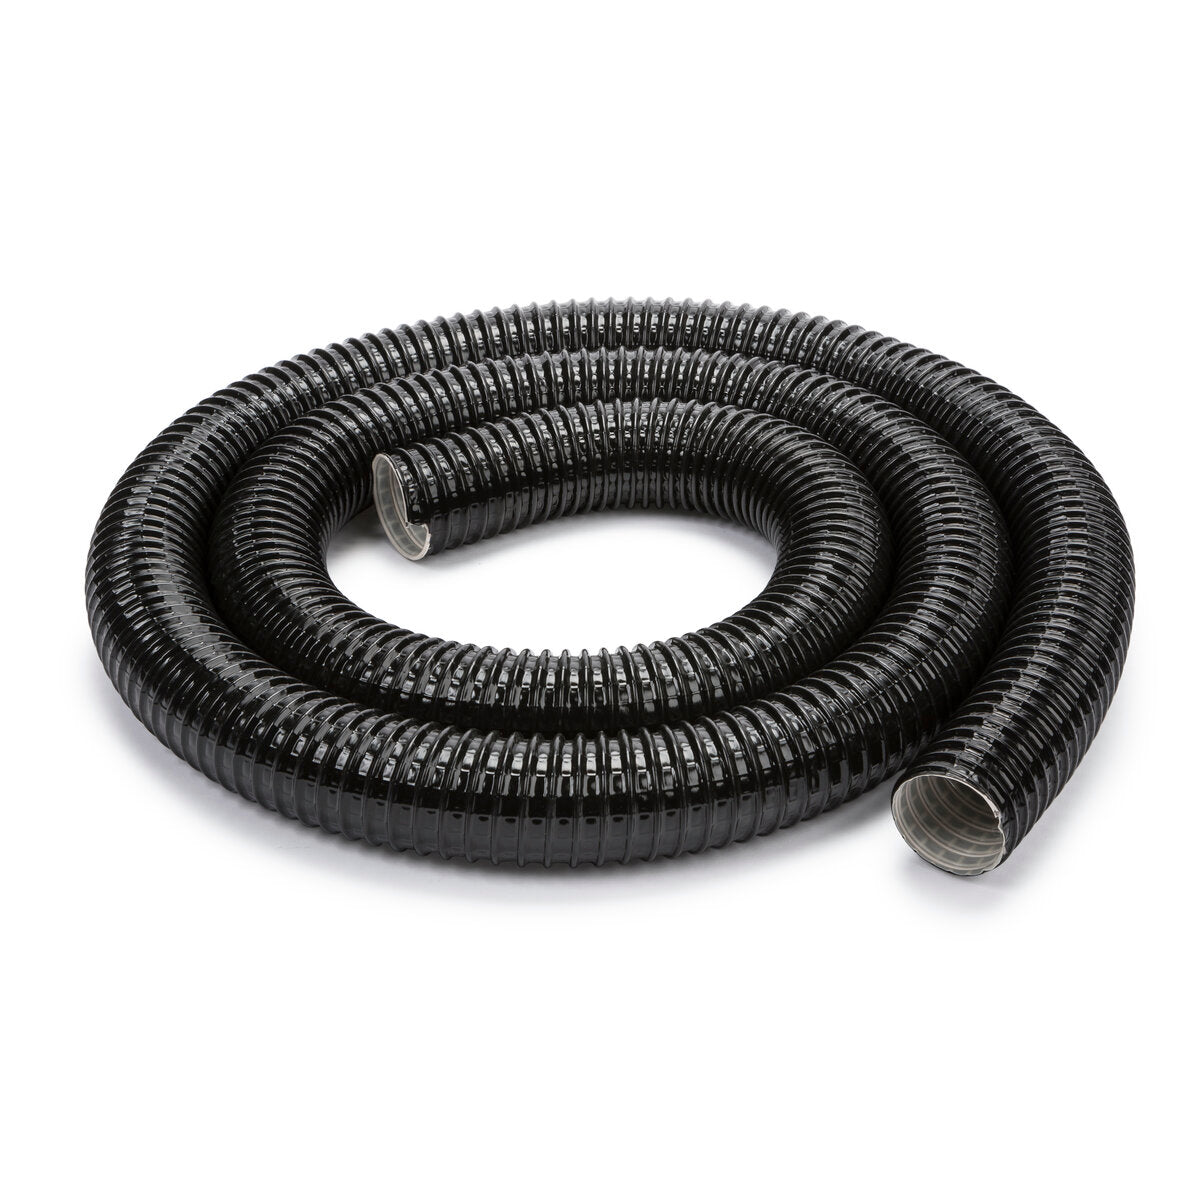 Lincoln Electric - Extraction Hose, 1-3/4 in. (45mm) Diameter (ID) x 8 ft. (2.5m) Length - K4113-8